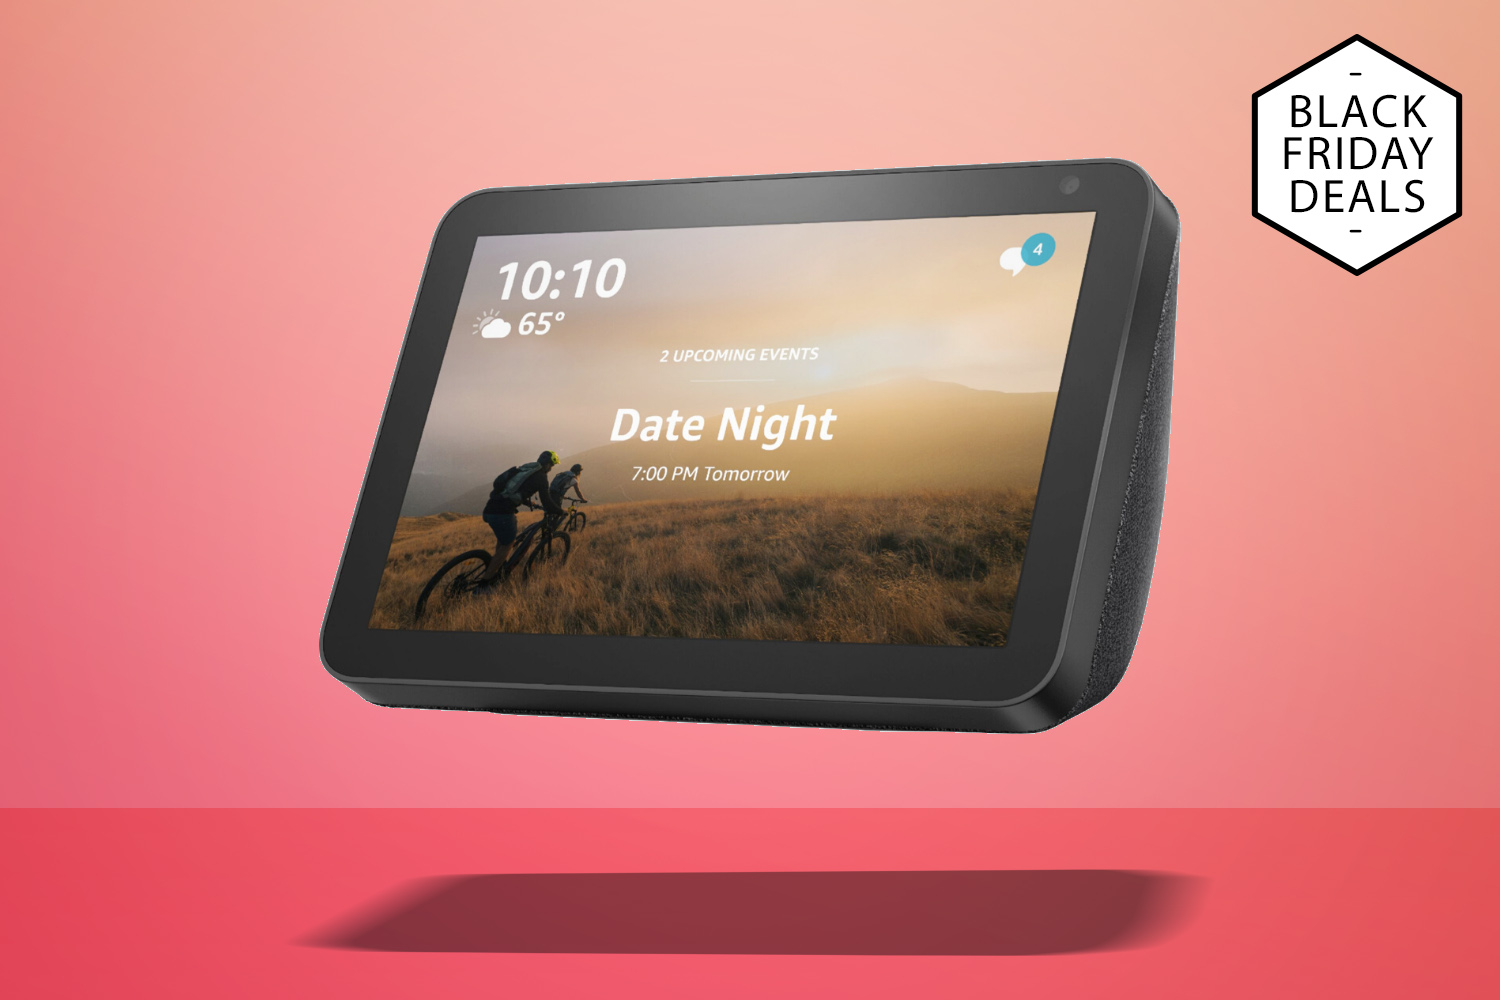 Echo Show deals start at $49.99 right now